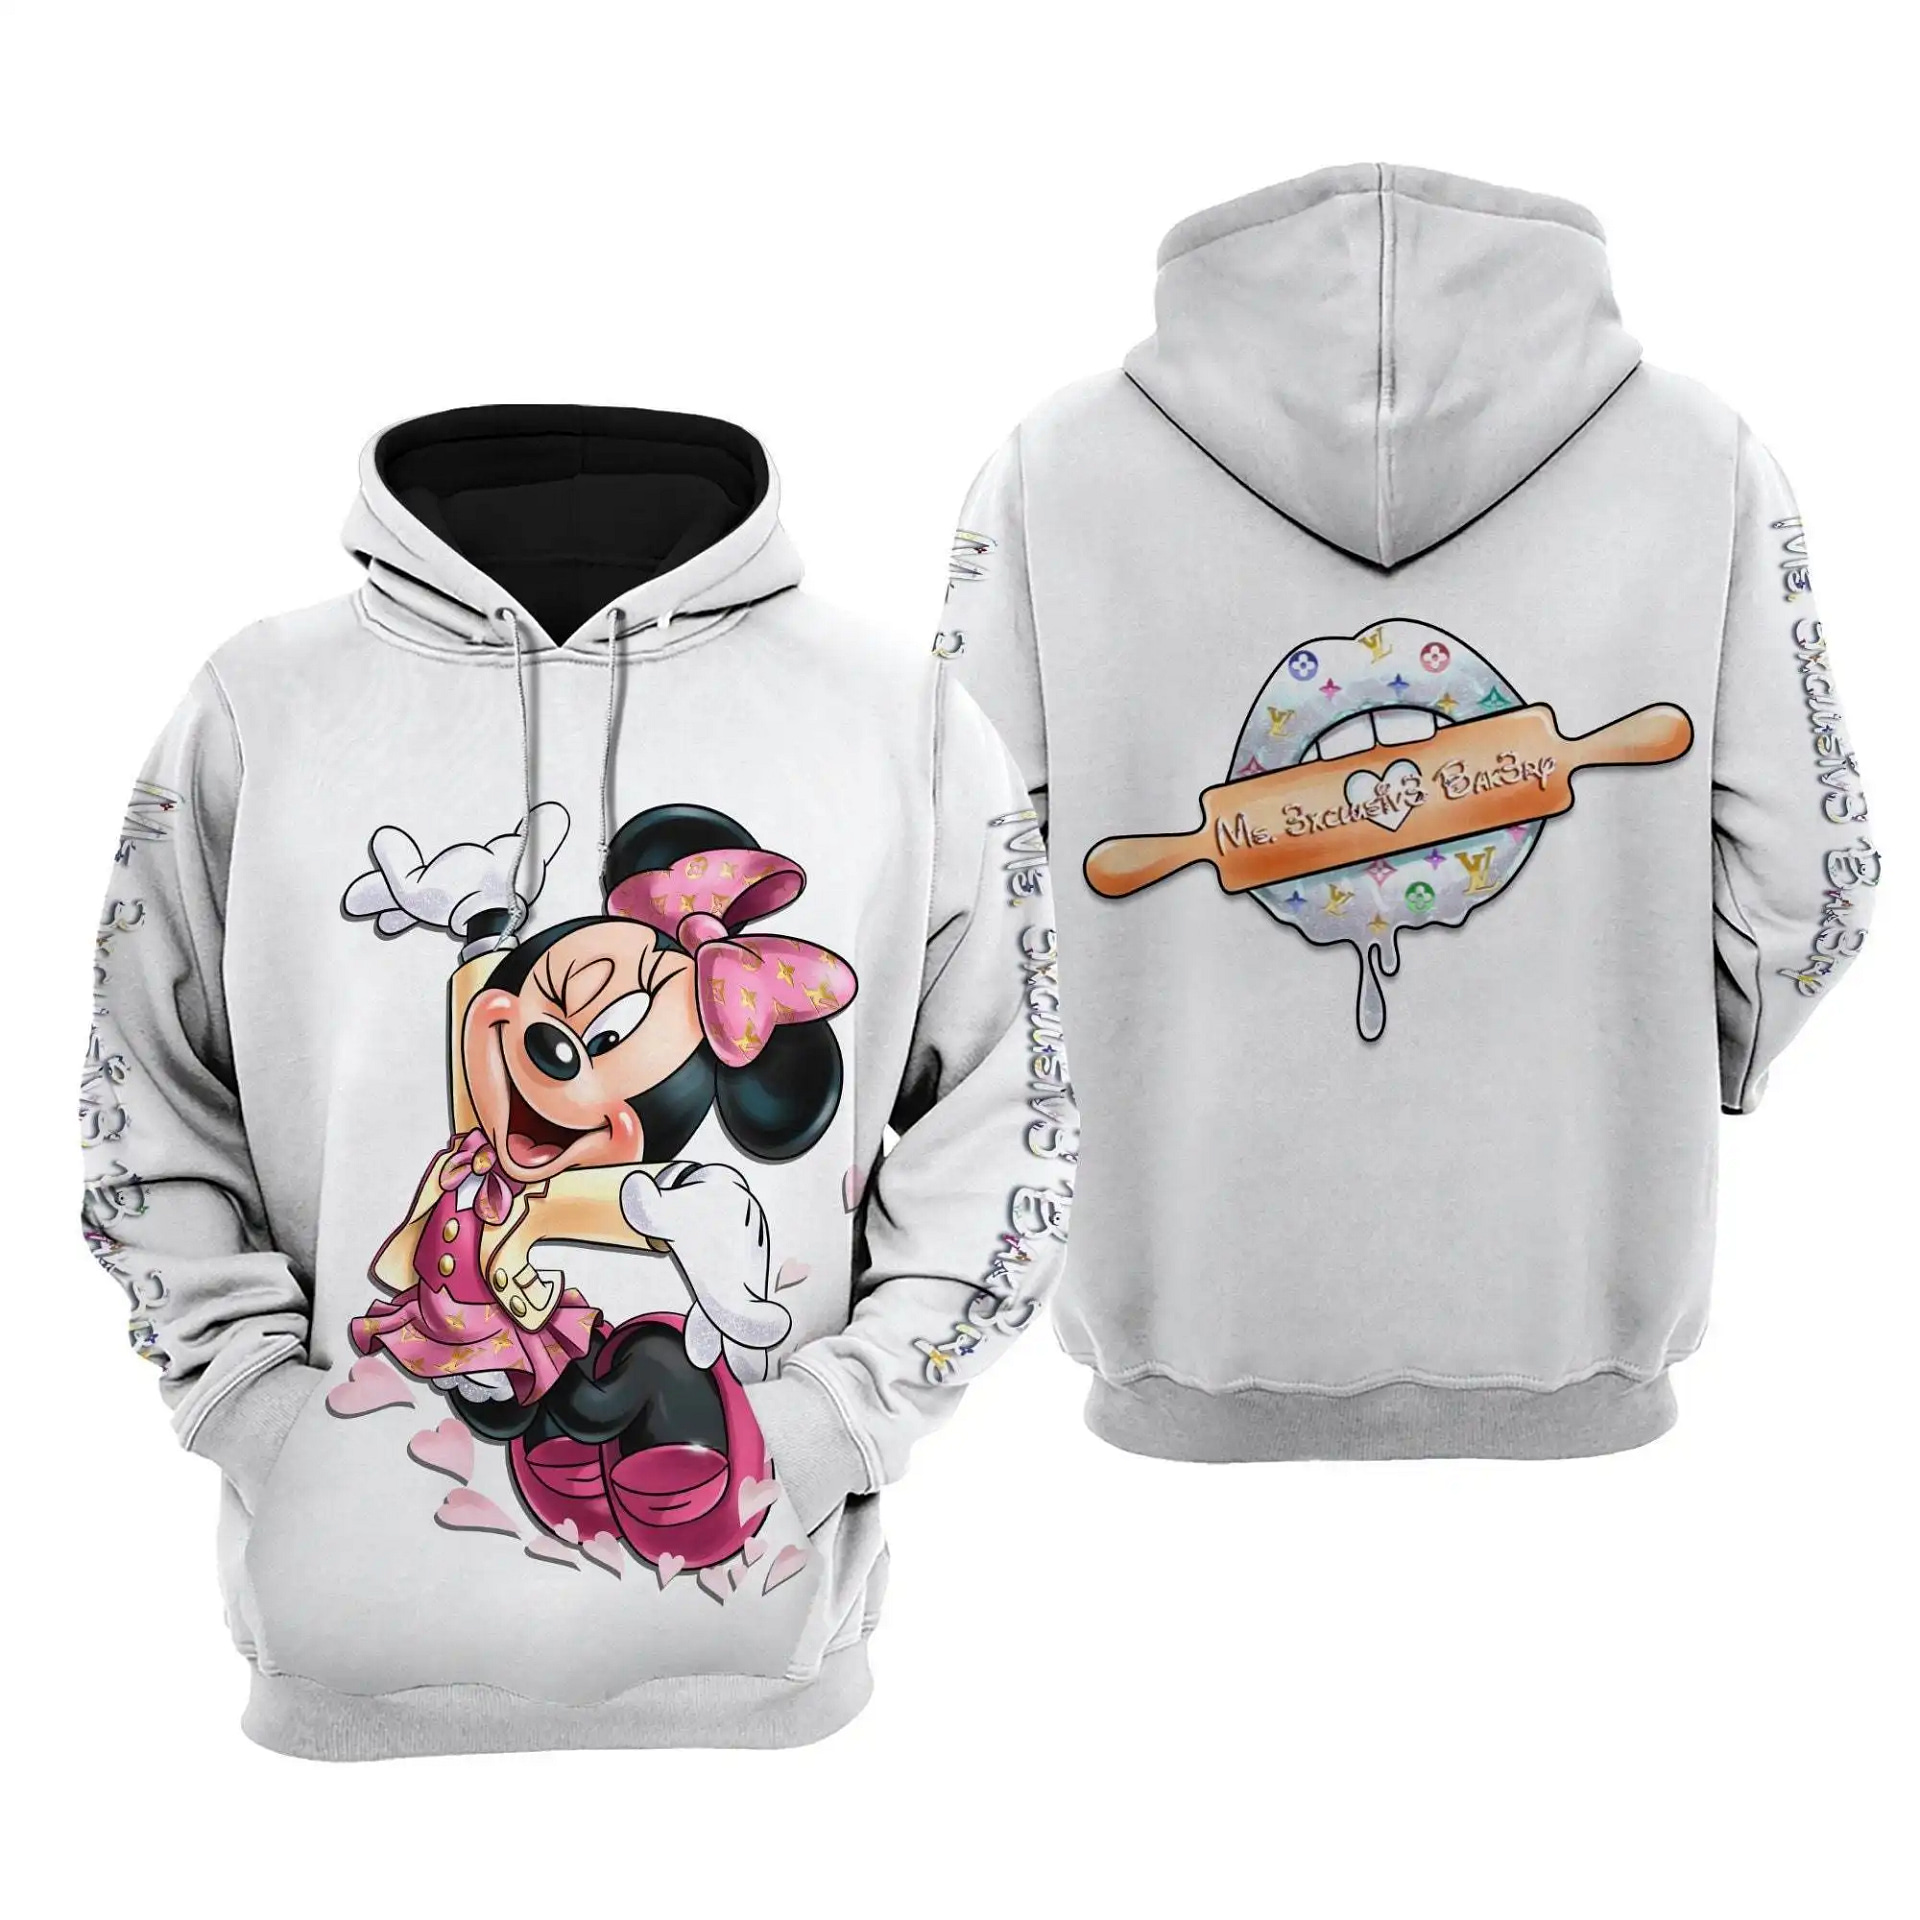 Minnie Mouse Ms. 3Xclusiv3 Bak3Ry Disney Cartoon Graphic Outfits Clothing Men Women Kids Toddlers Hoodie 3D